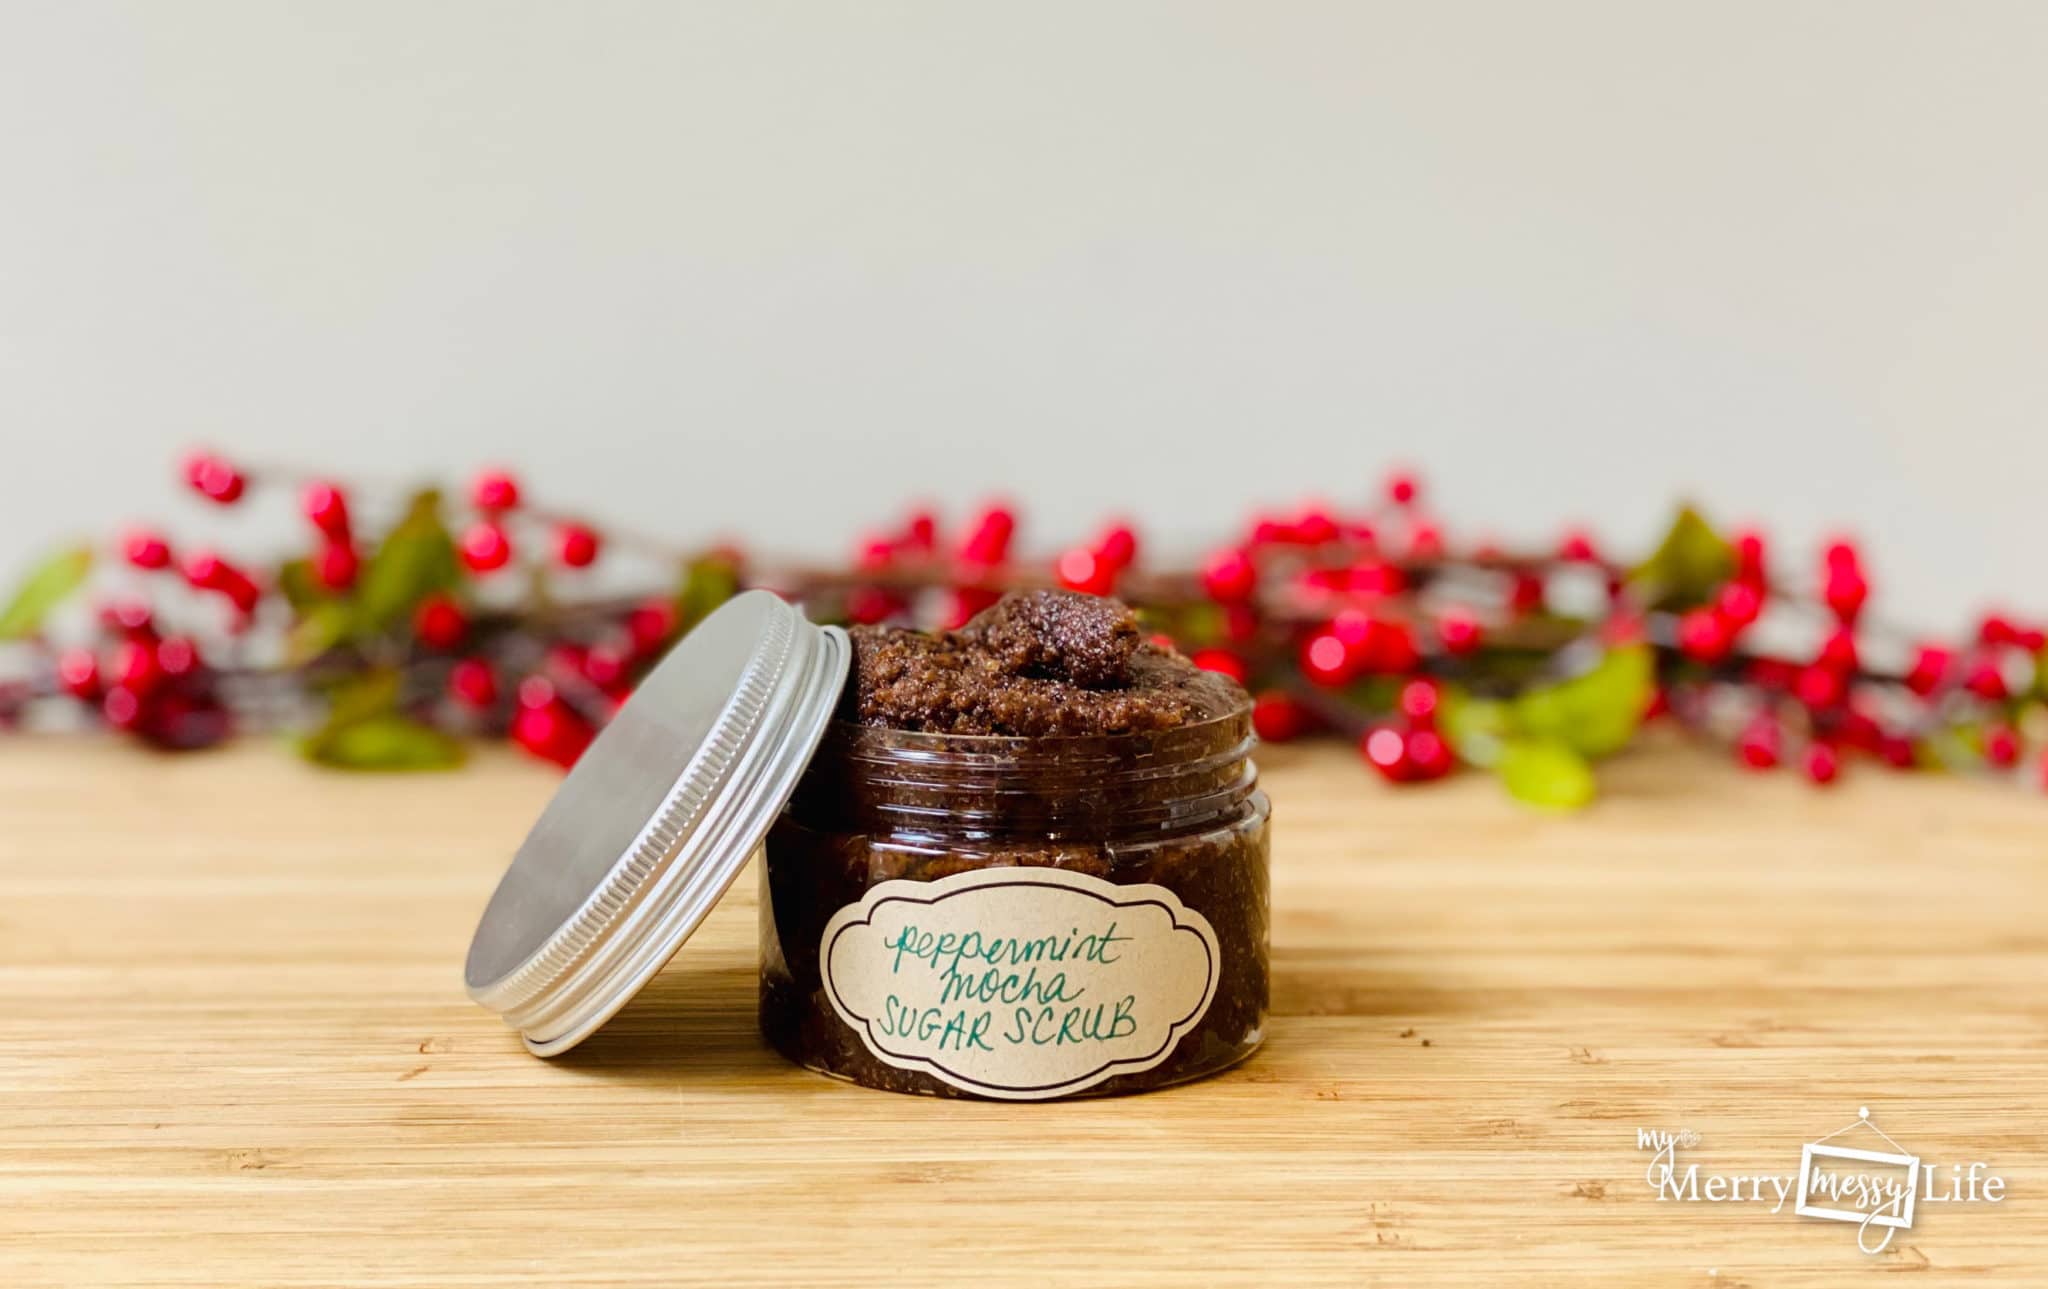 Natural Peppermint Mocha Sugar Scrub Recipe - perfect to make and give as gifts to friends, family and teachers!